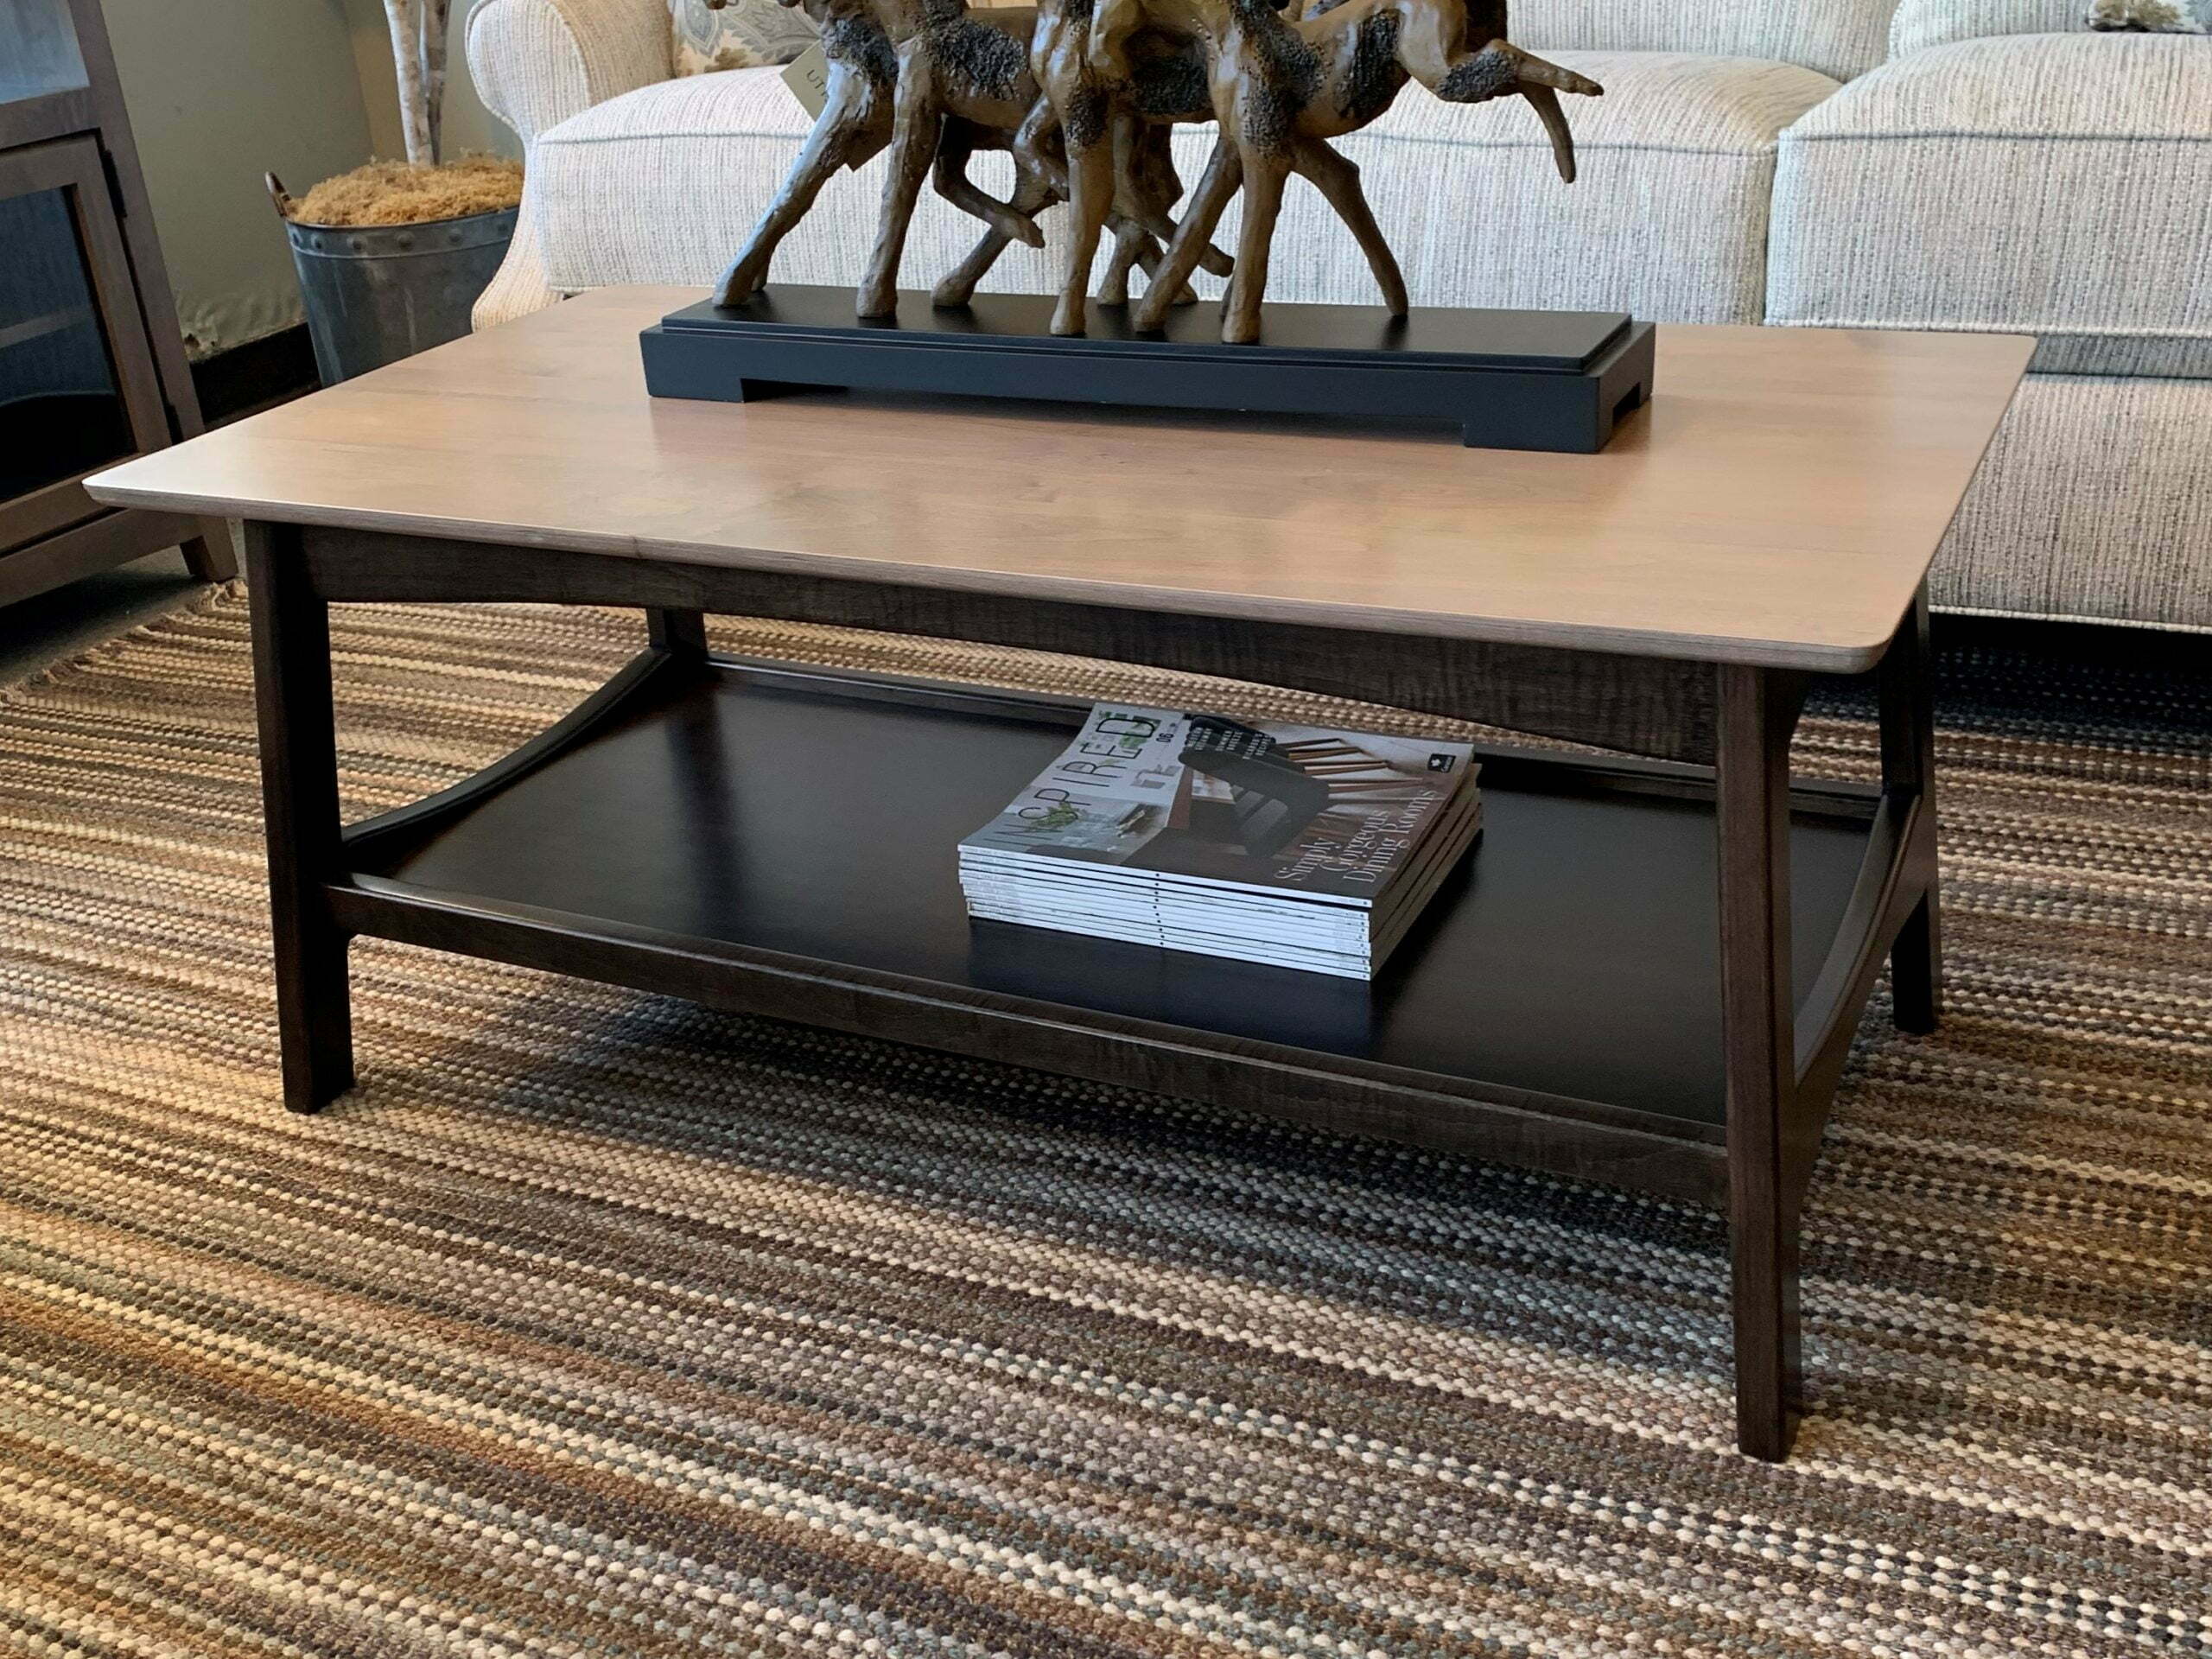 Hopewood coffee table with light wooden table top and dark wood legs